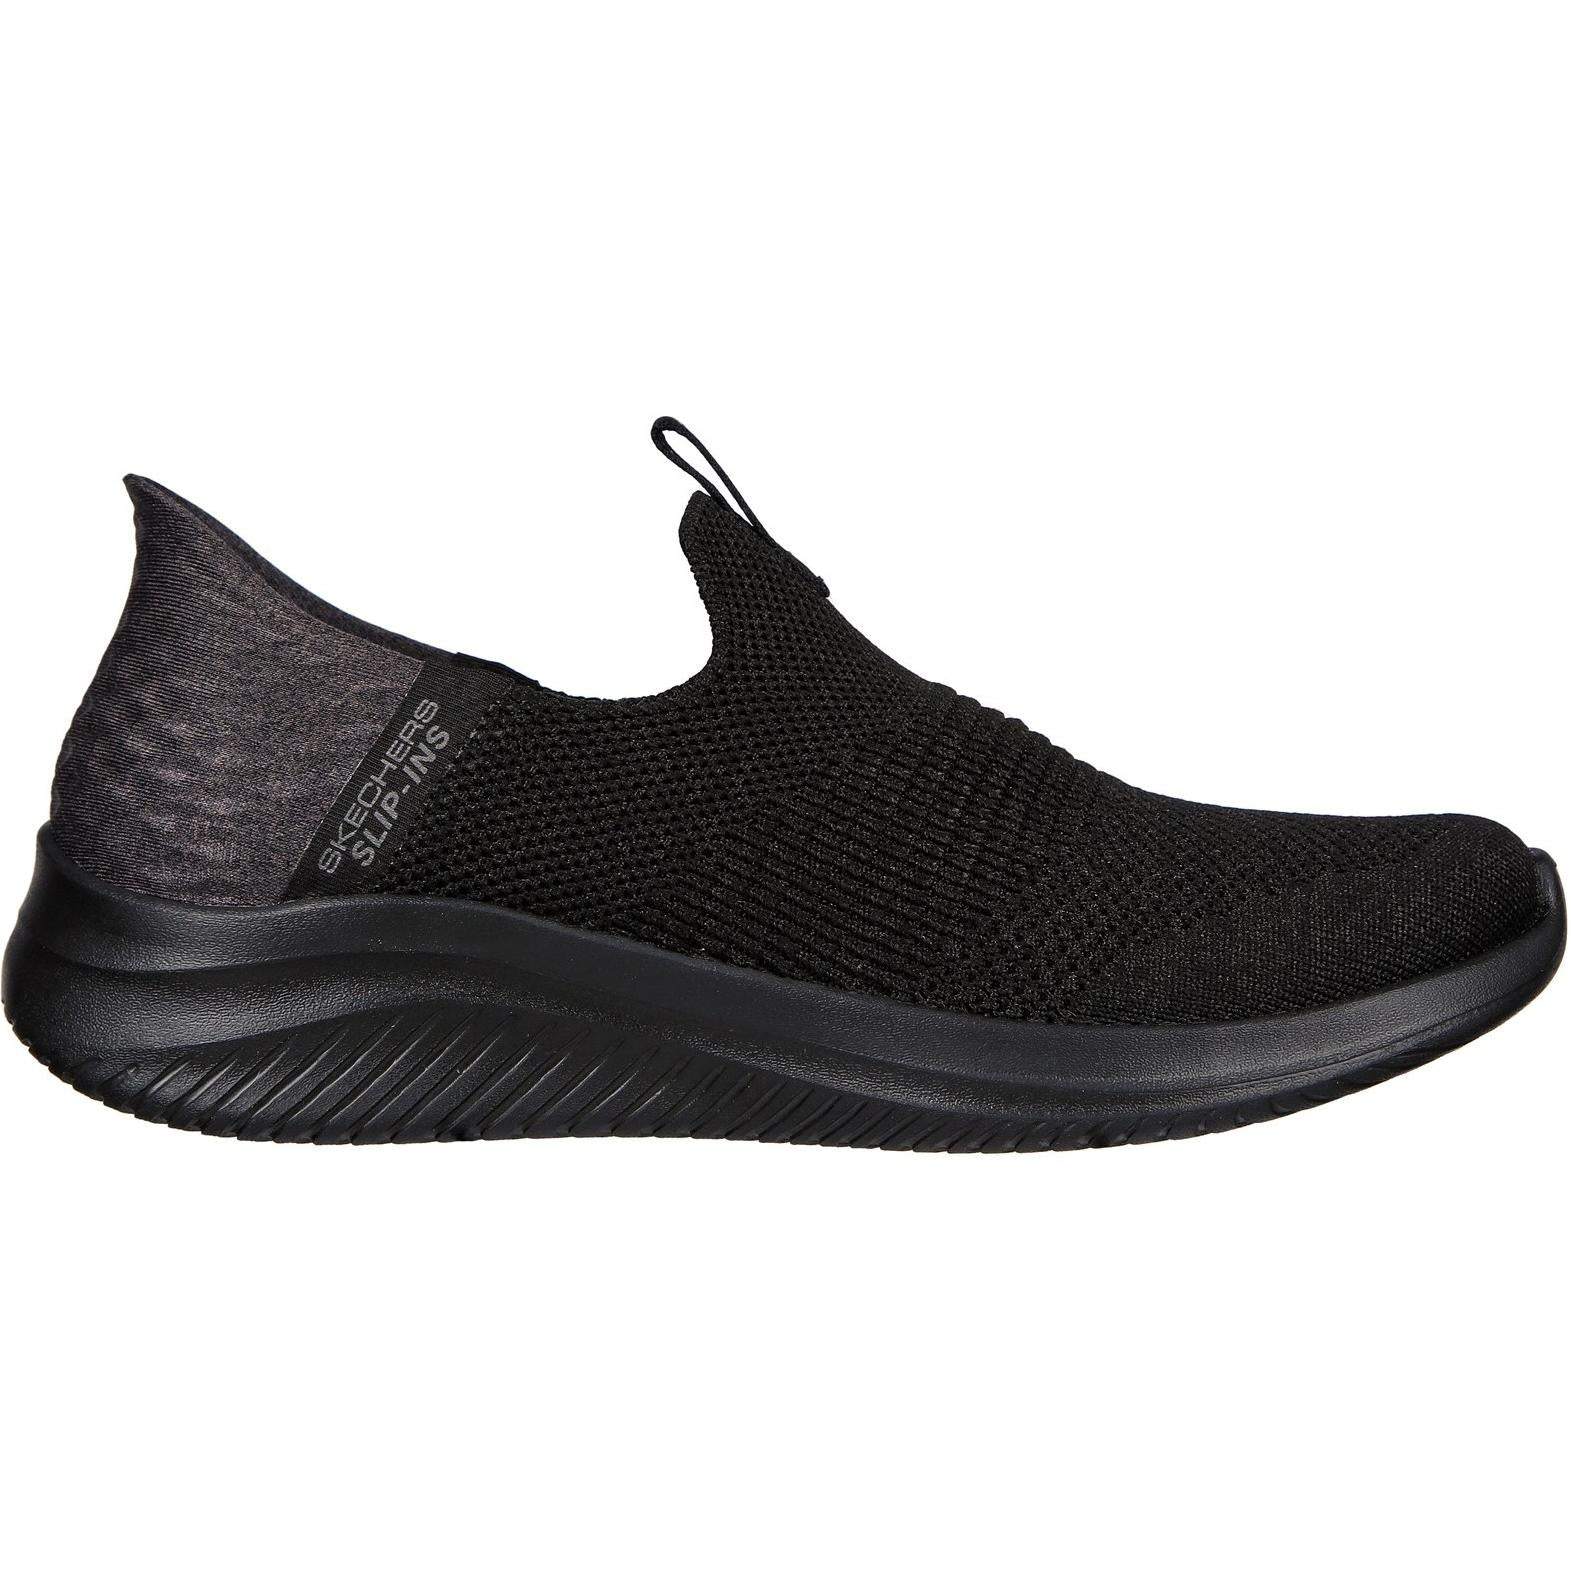 Skechers Ultra Flex 3.0 Smooth Step Shoes